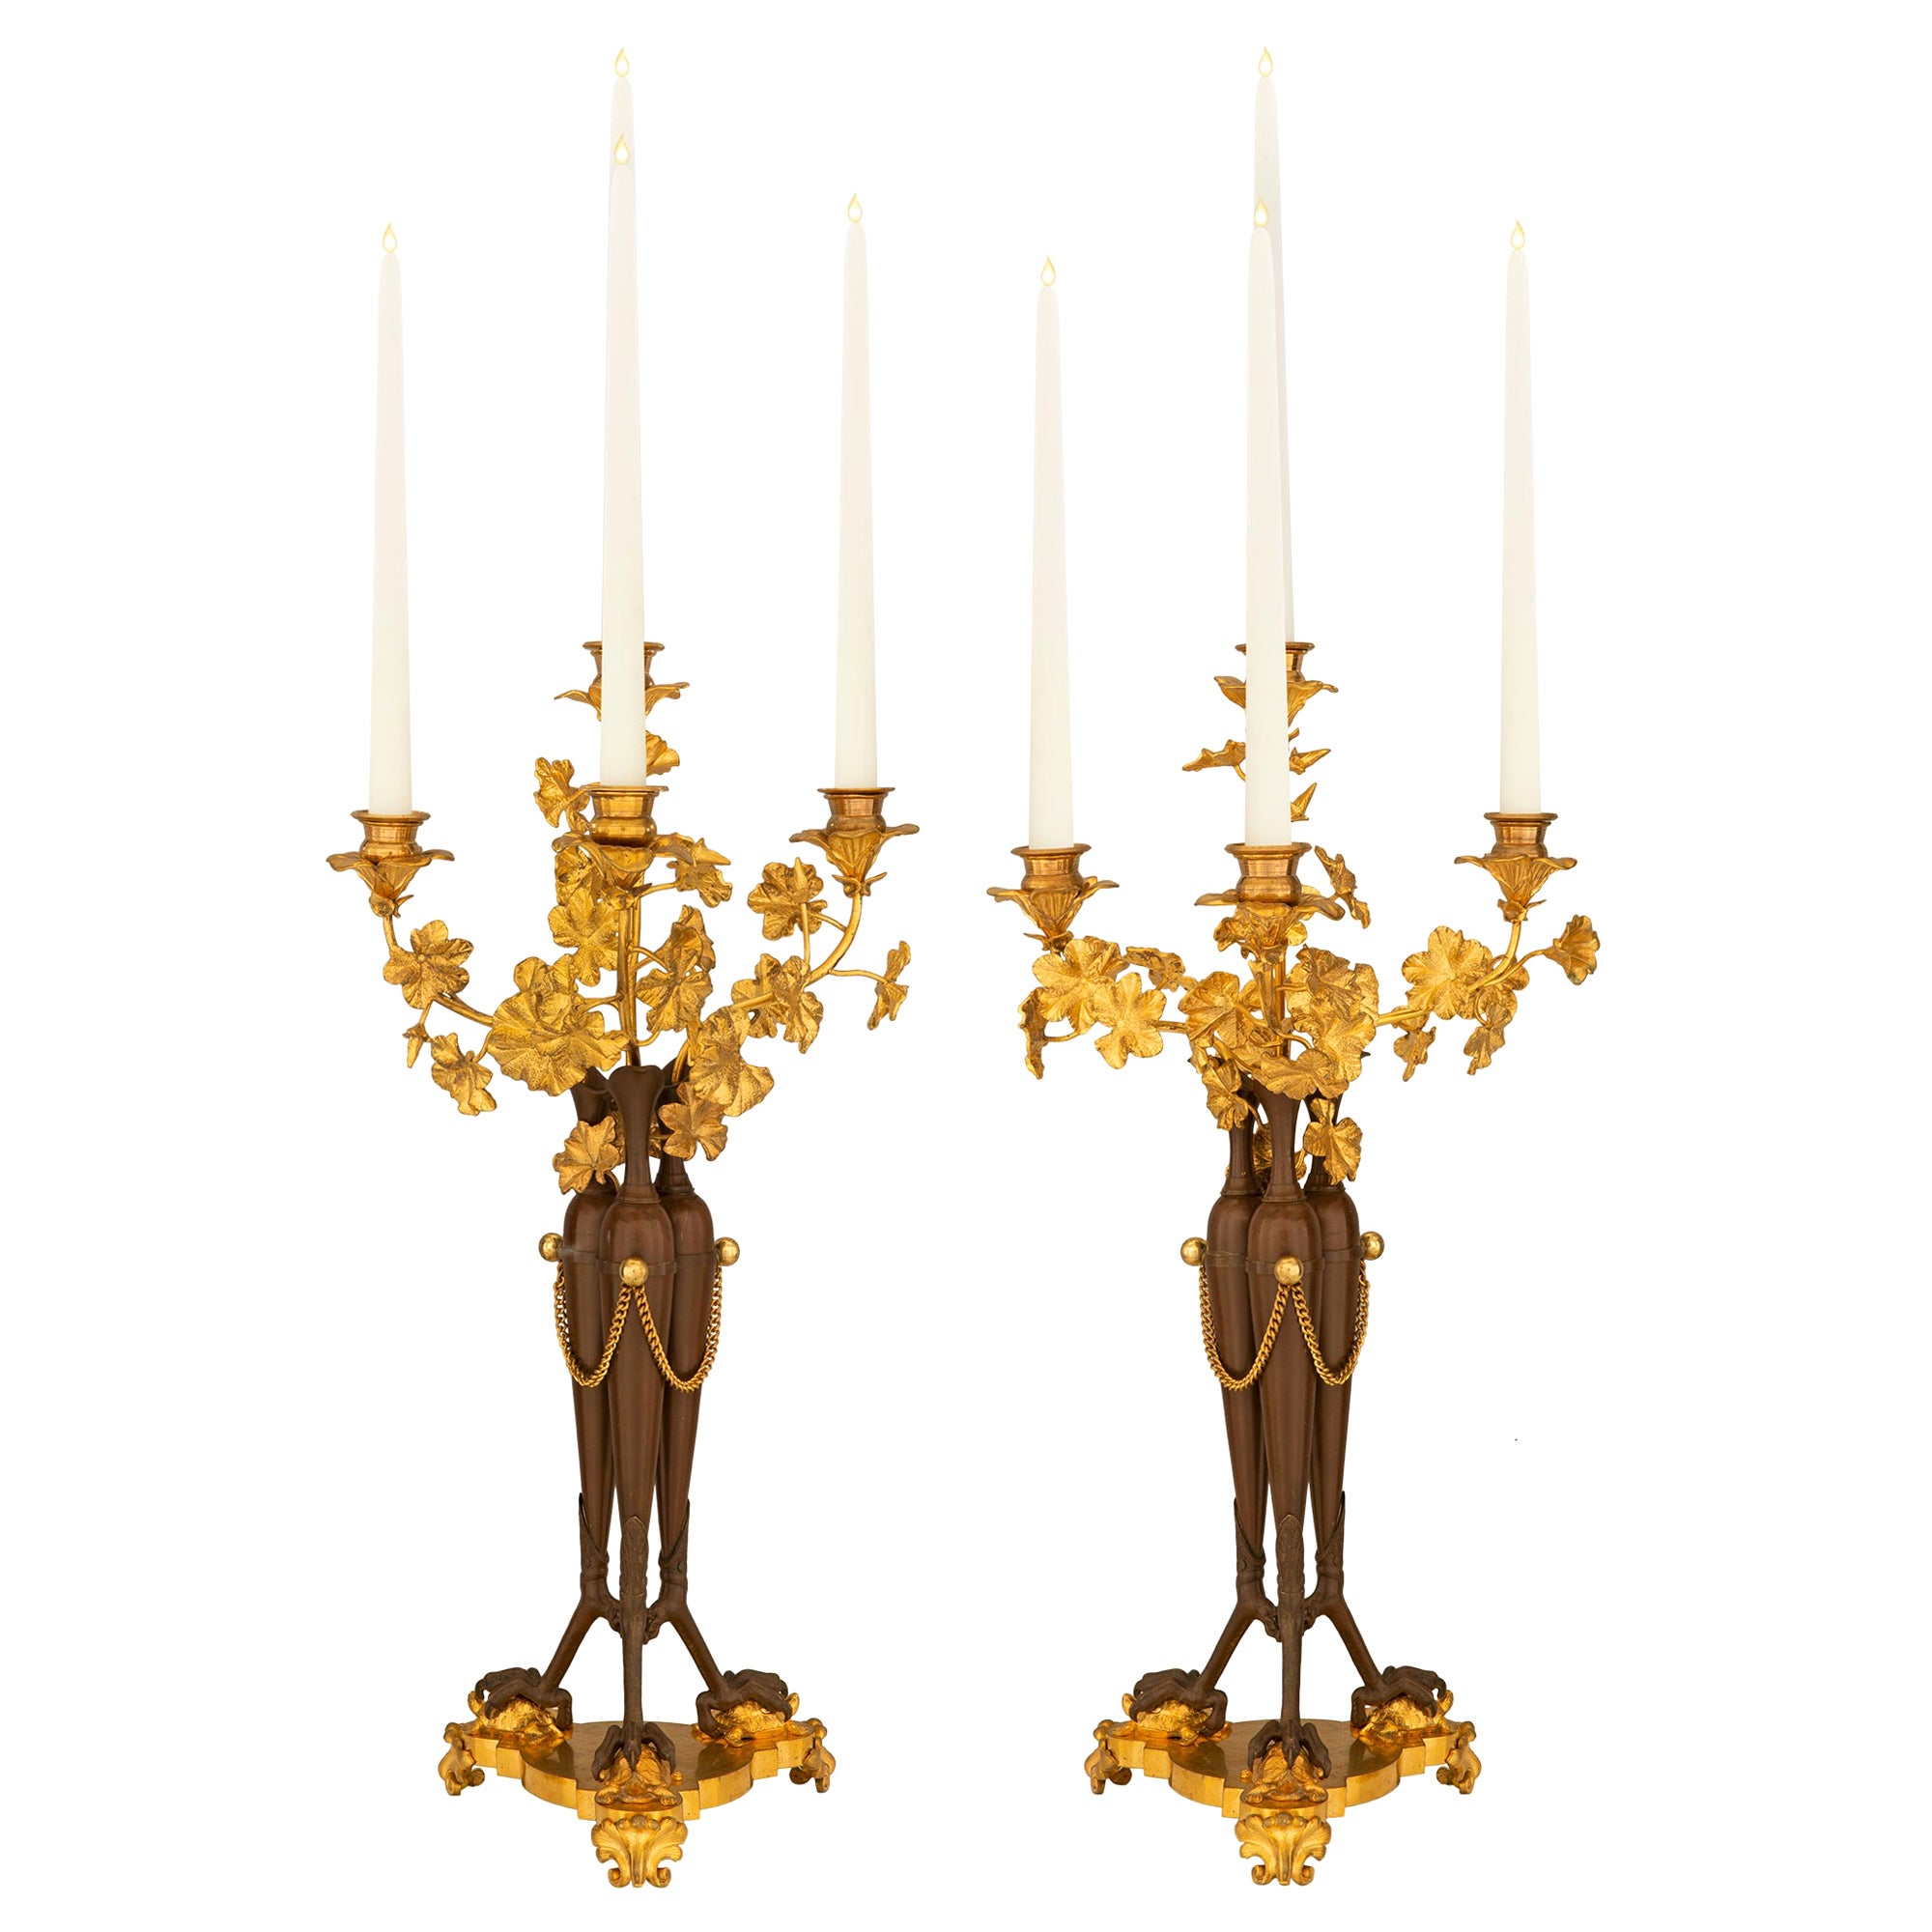 Pair of French 19th Century Neoclassical St. Bronze and Ormolu Candelabras For Sale